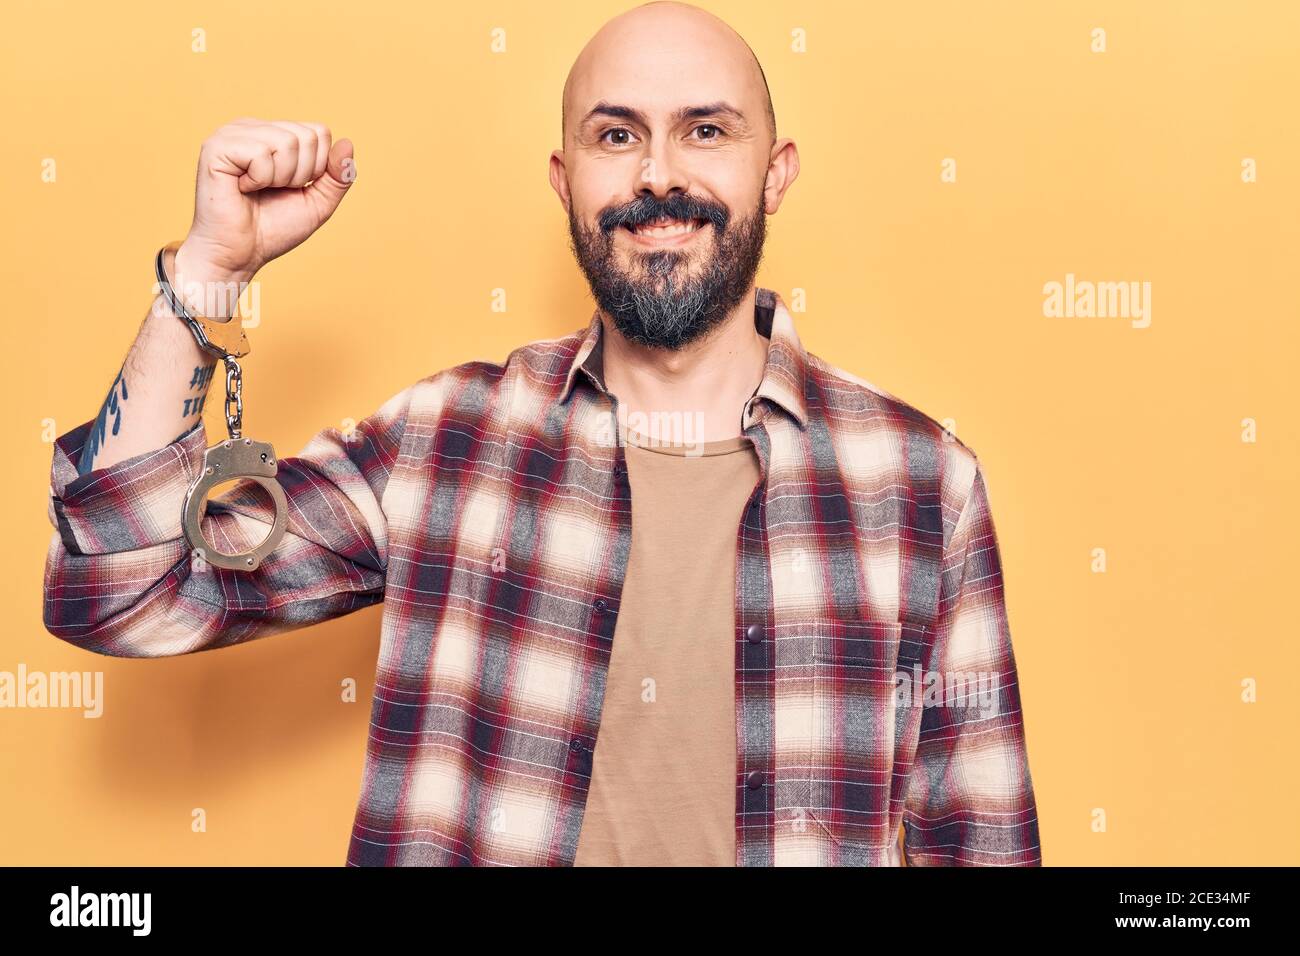 Young handsome man wearing prisoner handcuffs looking positive and happy standing and smiling with a confident smile showing teeth Stock Photo